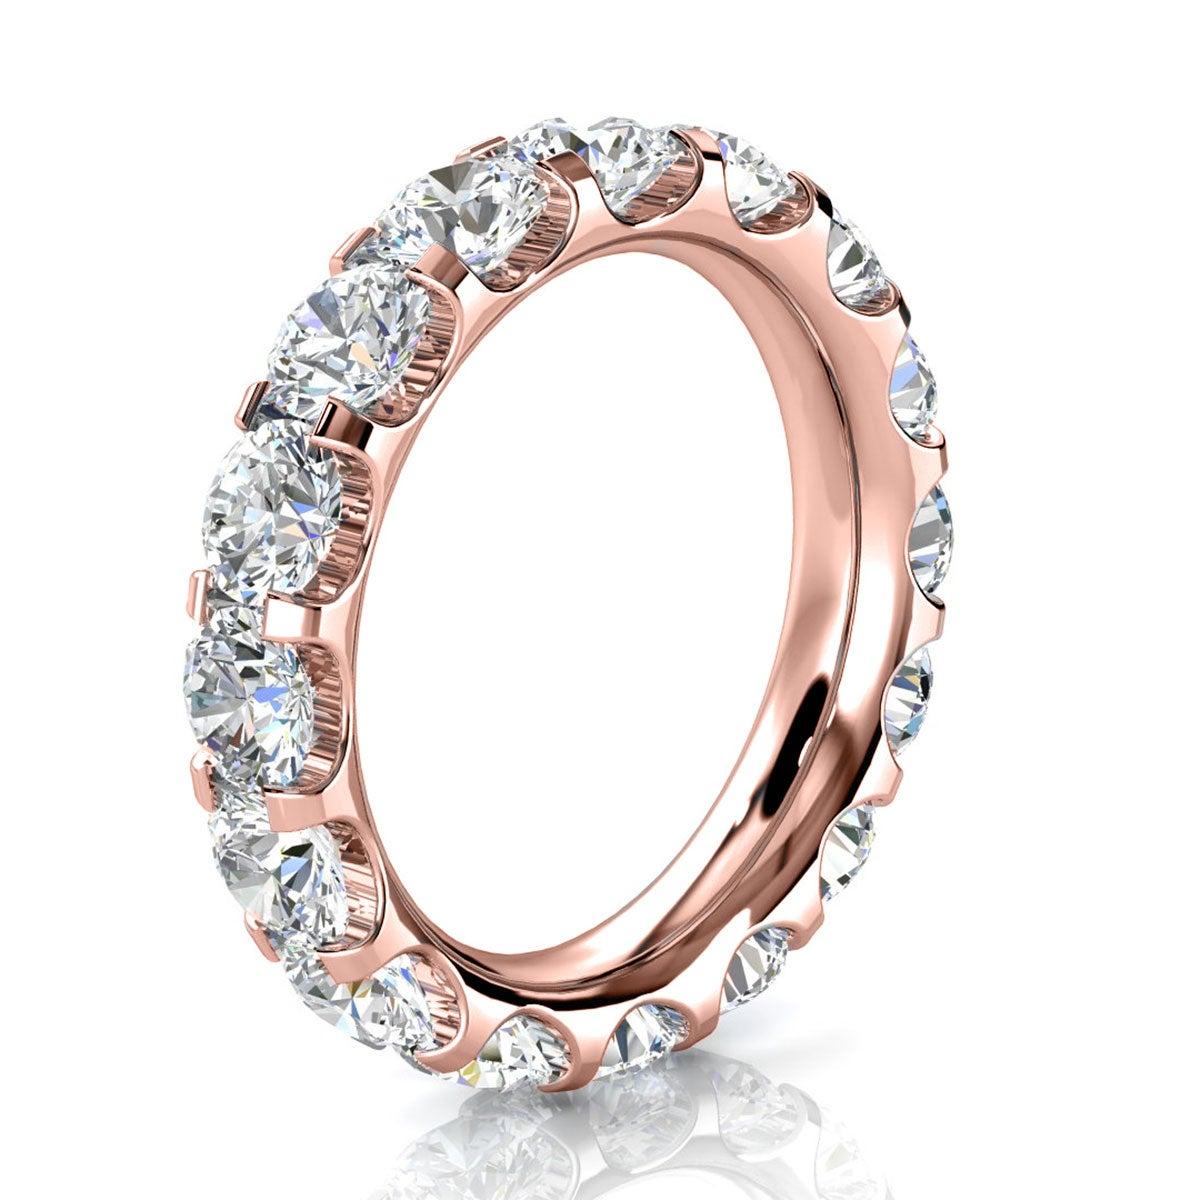 For Sale:  14k Rose Gold Viola Eternity Micro-Prong Diamond Ring '4 Ct. Tw' 2